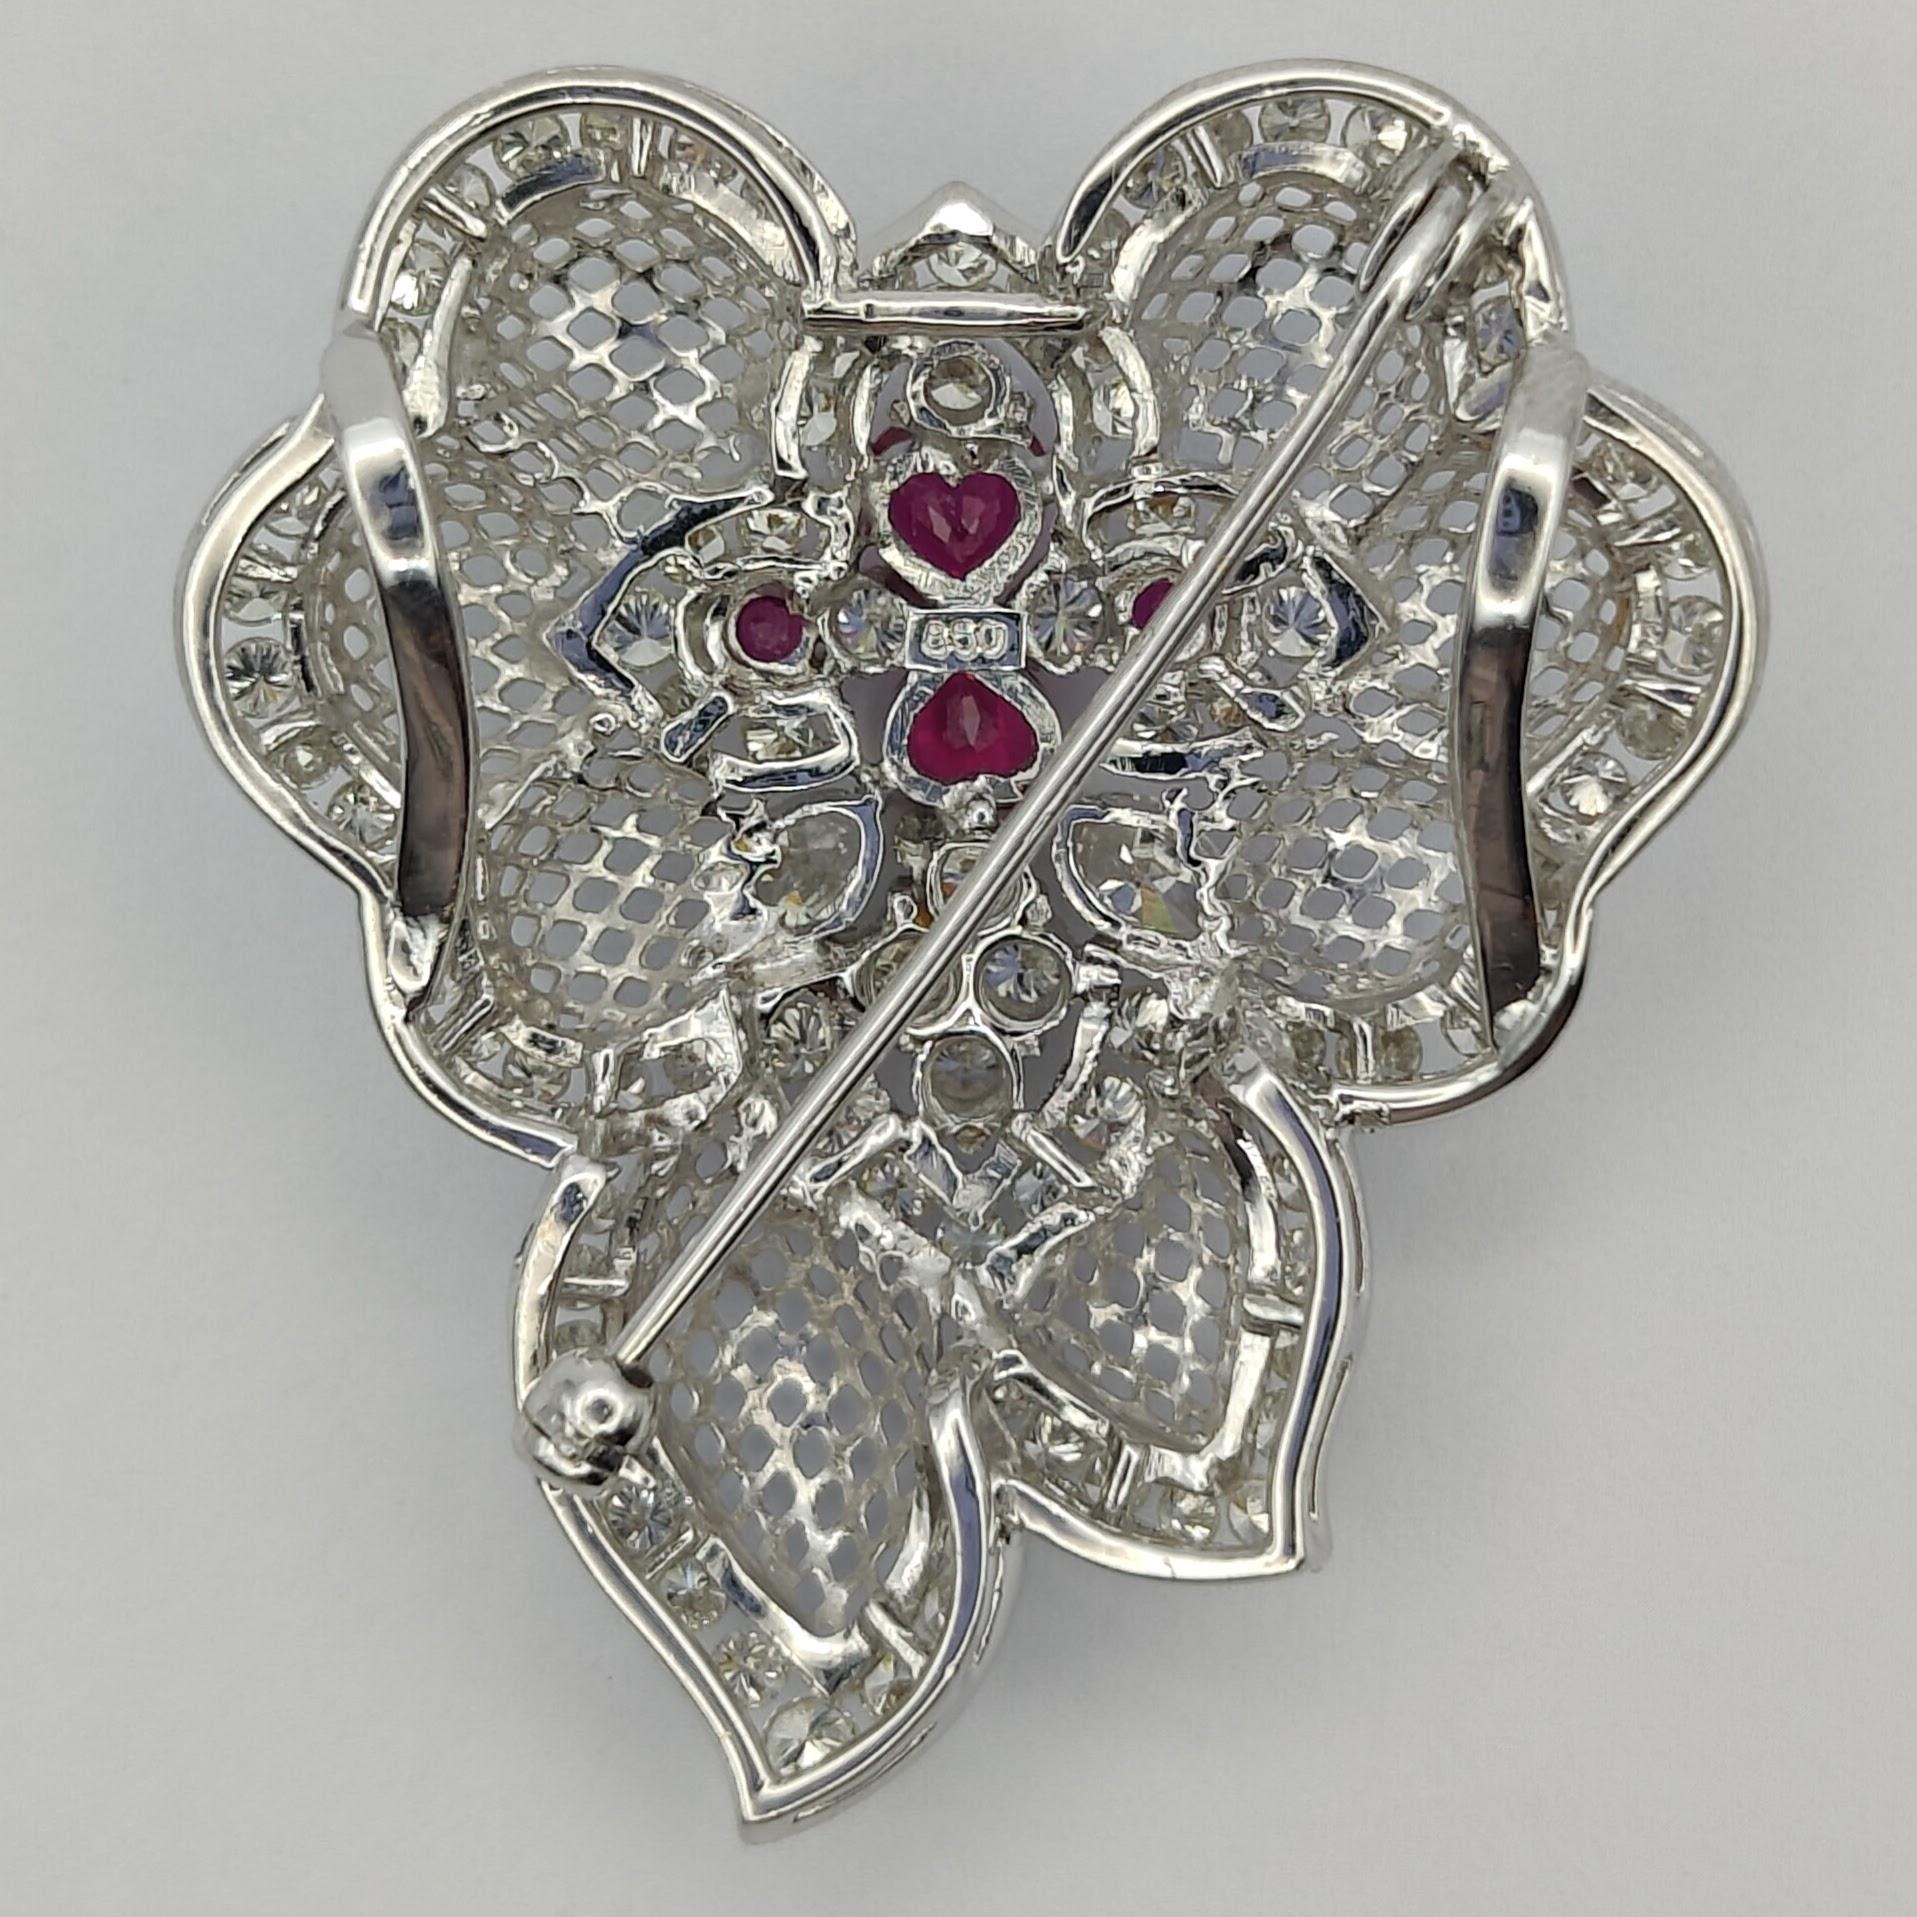 Women's Baroque 0.78 Carat Ruby and 2.7 Carat Diamond Pendant Brooch in 18k White Gold For Sale